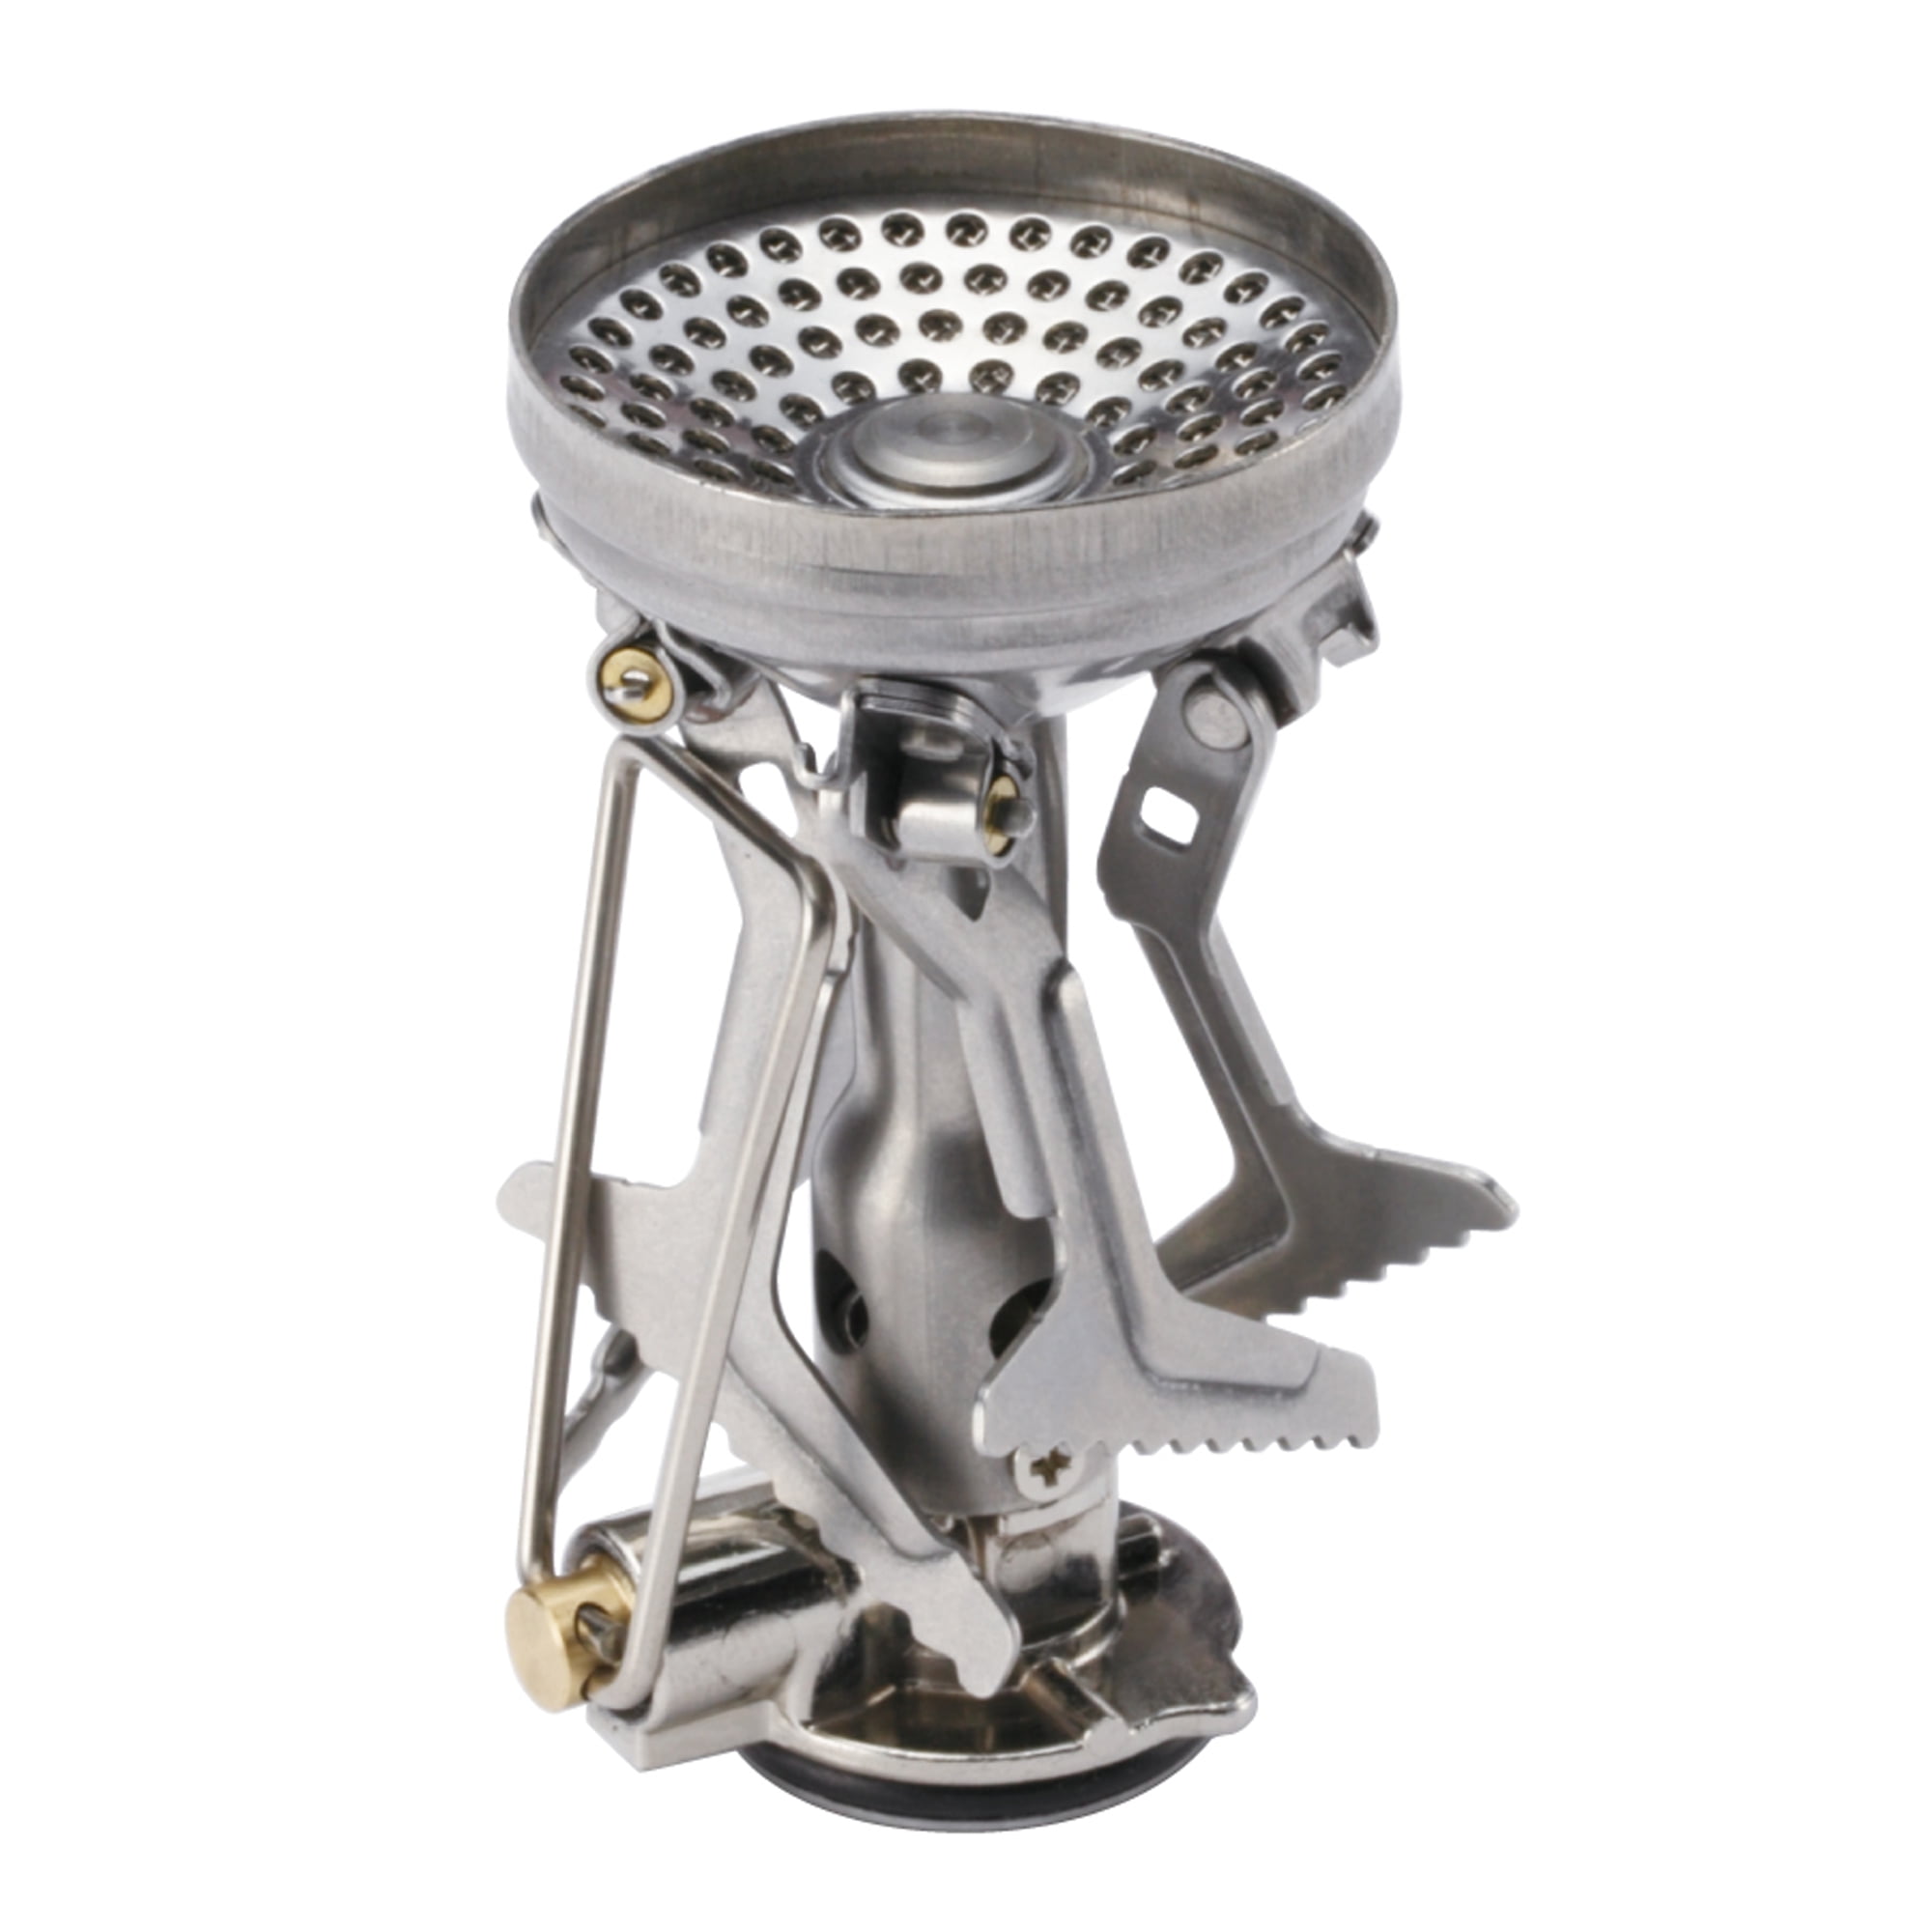 SOTO New River Pot Backpacking & Camping Cookware Stove 